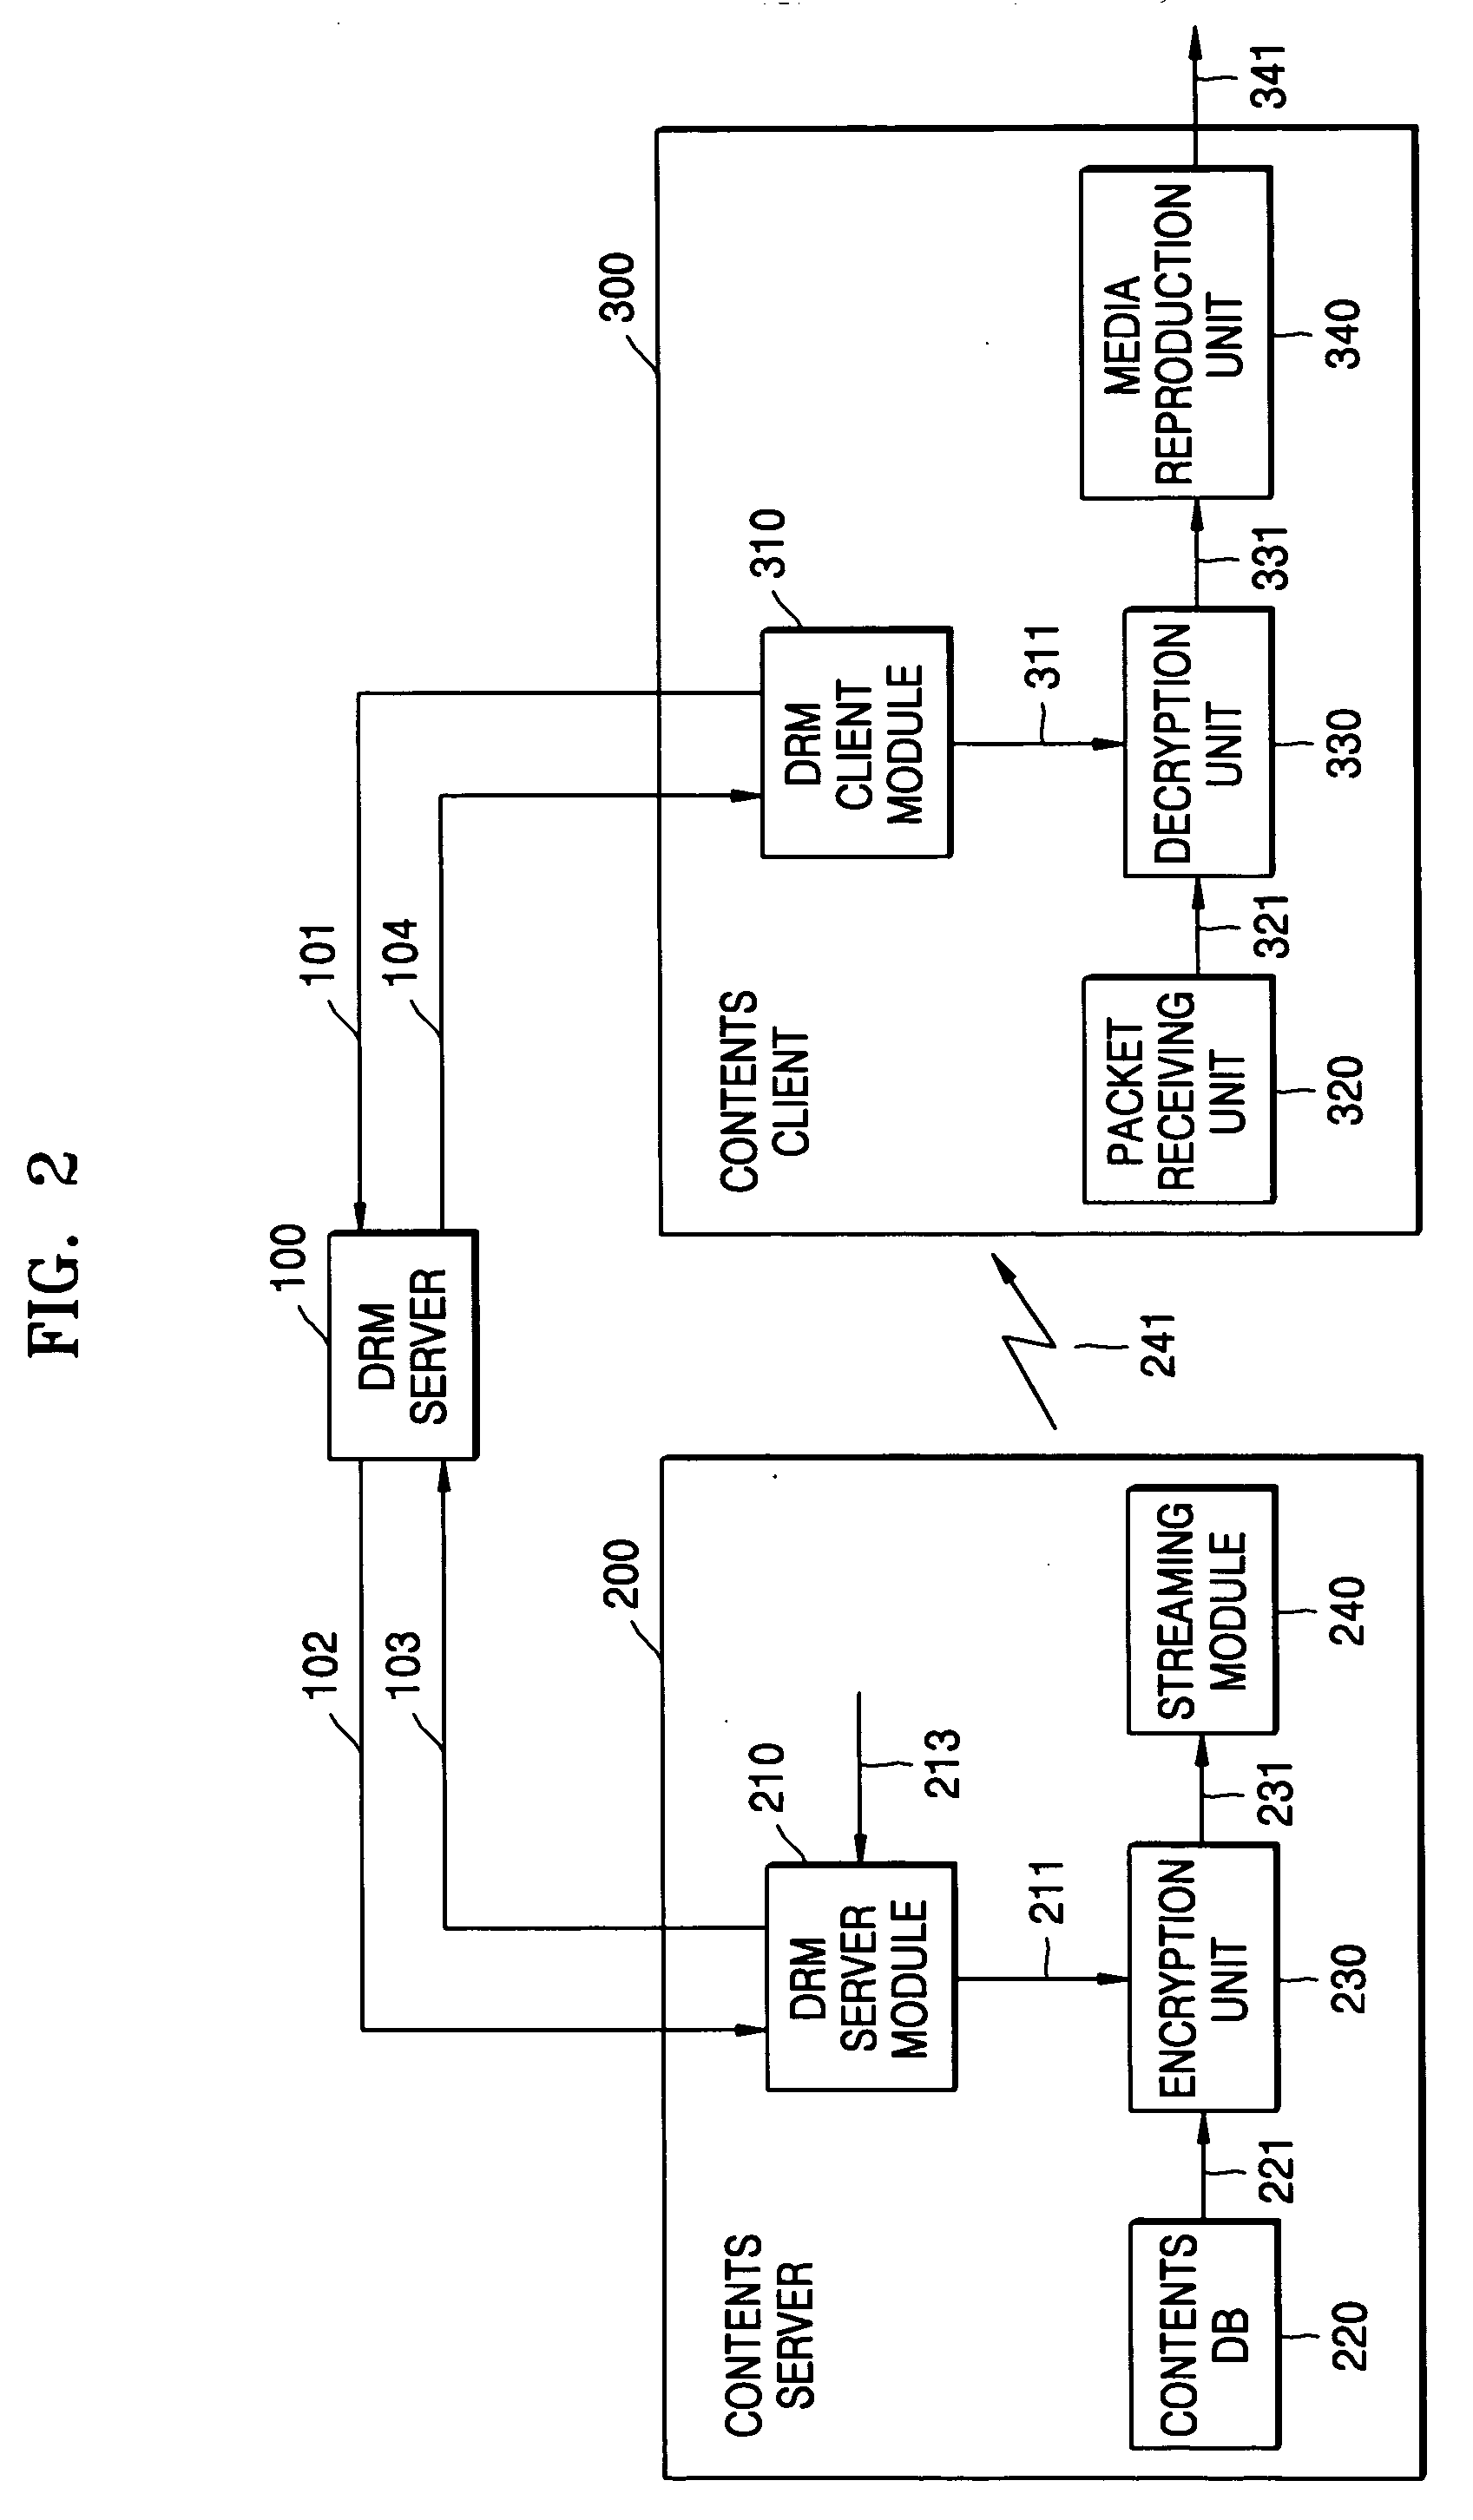 Motion picture file encryption method and digital rights management method using the same